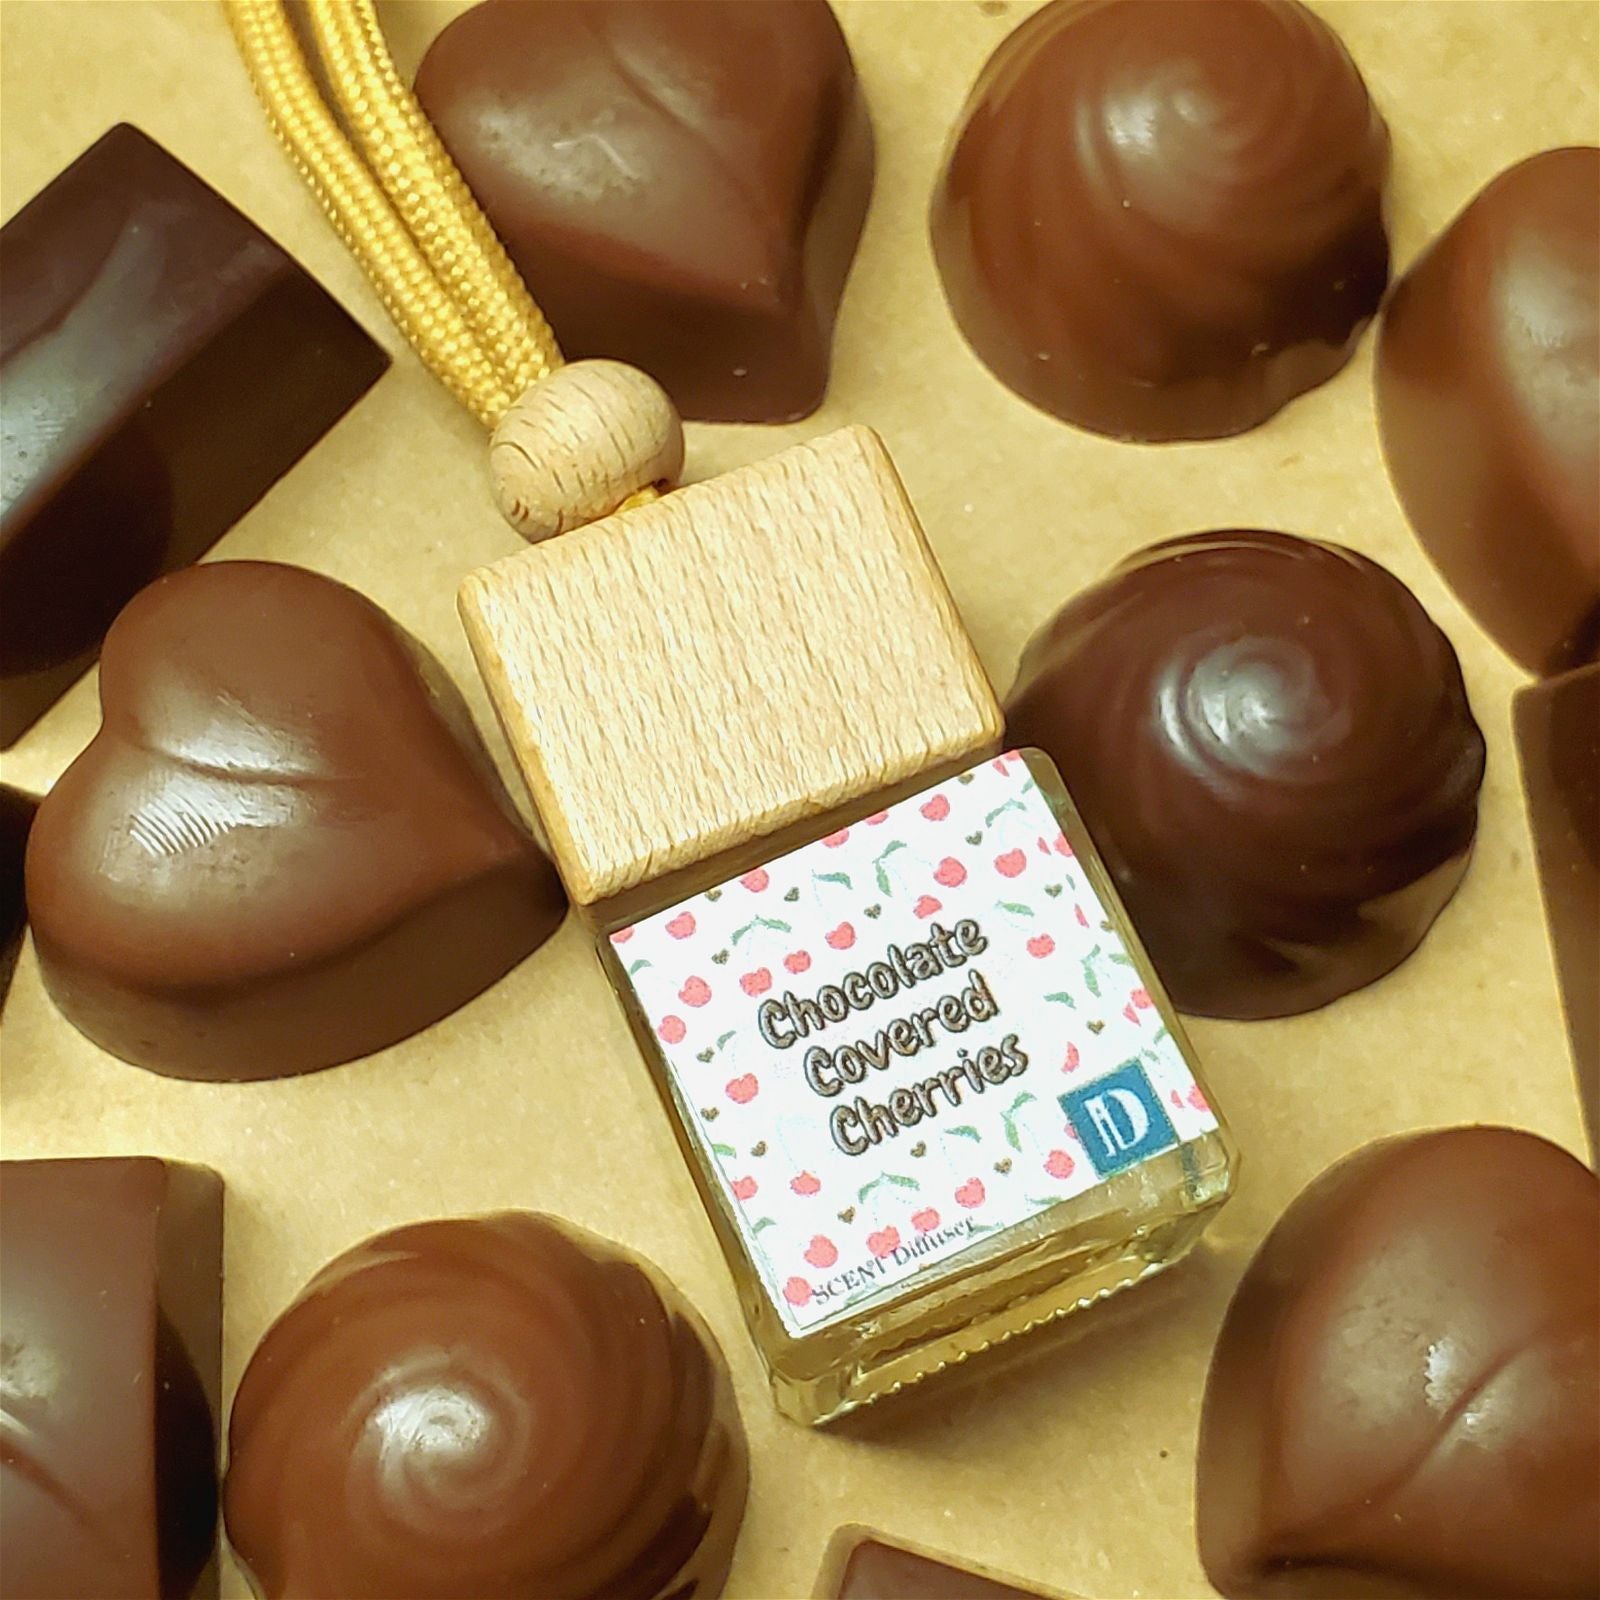 Chocolate Covered Cherries SCENT Diffuser (Air Freshener) | 8ml - D SCENT 